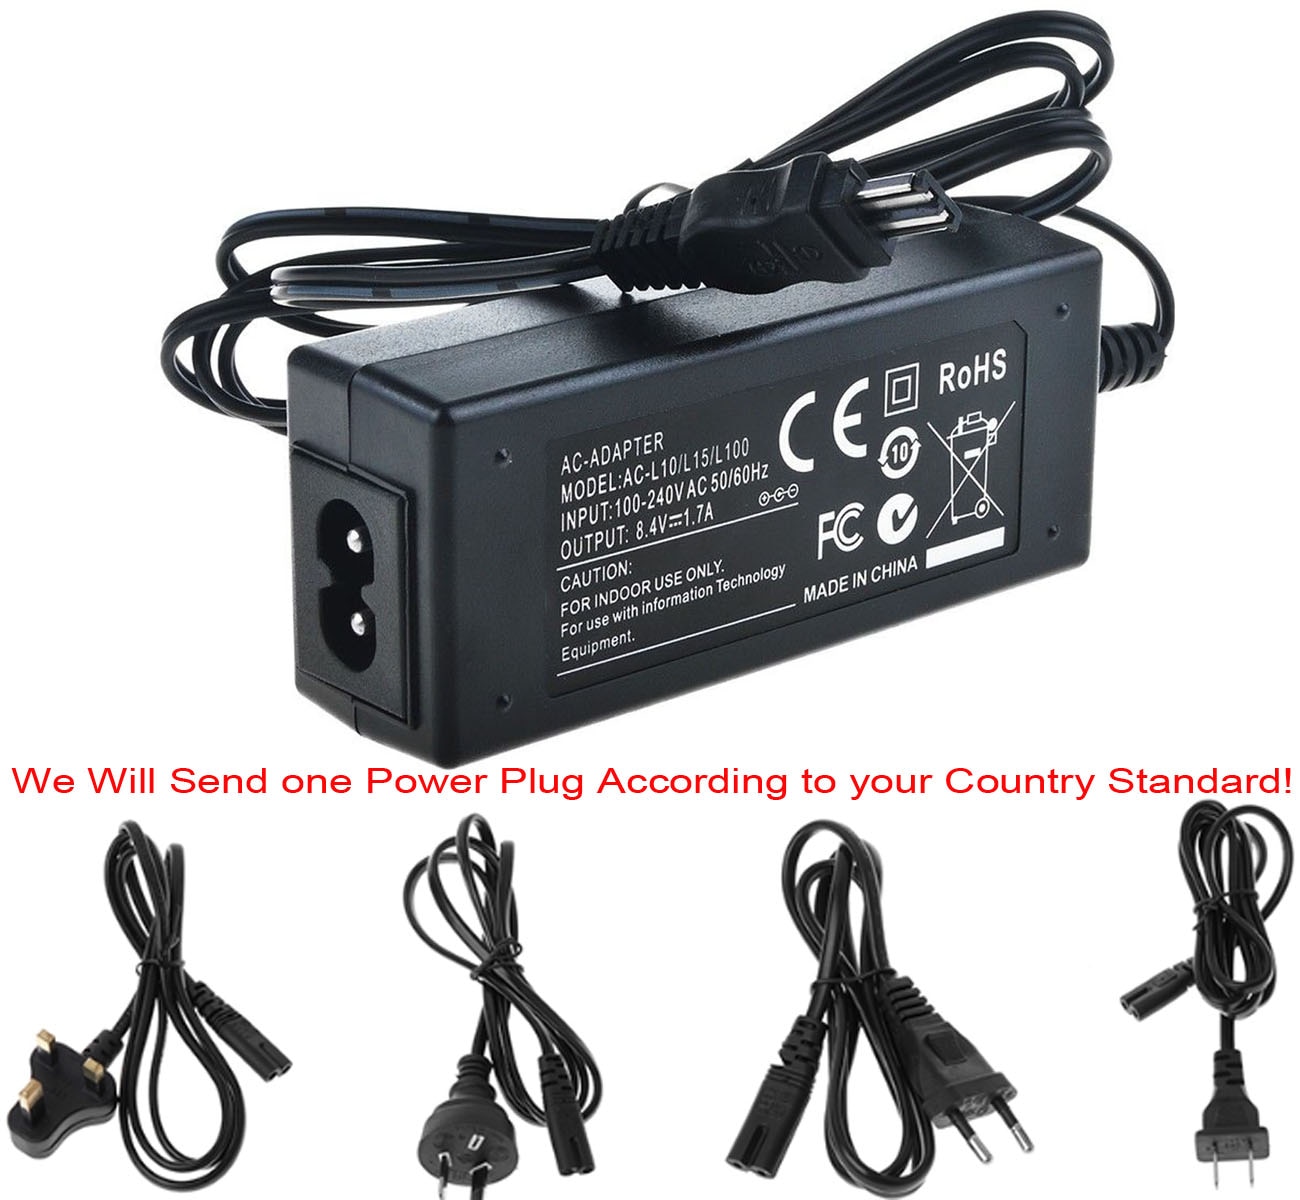 Ac Power Adapter Oplader Voor Sony CCD-TRV55E, CCD-TRV65E, CCD-TRV66E, CCD-TRV67E, CCD-TRV68E, CCD-TRV69E Handycam Camcorder: 1x AC Power Adapter